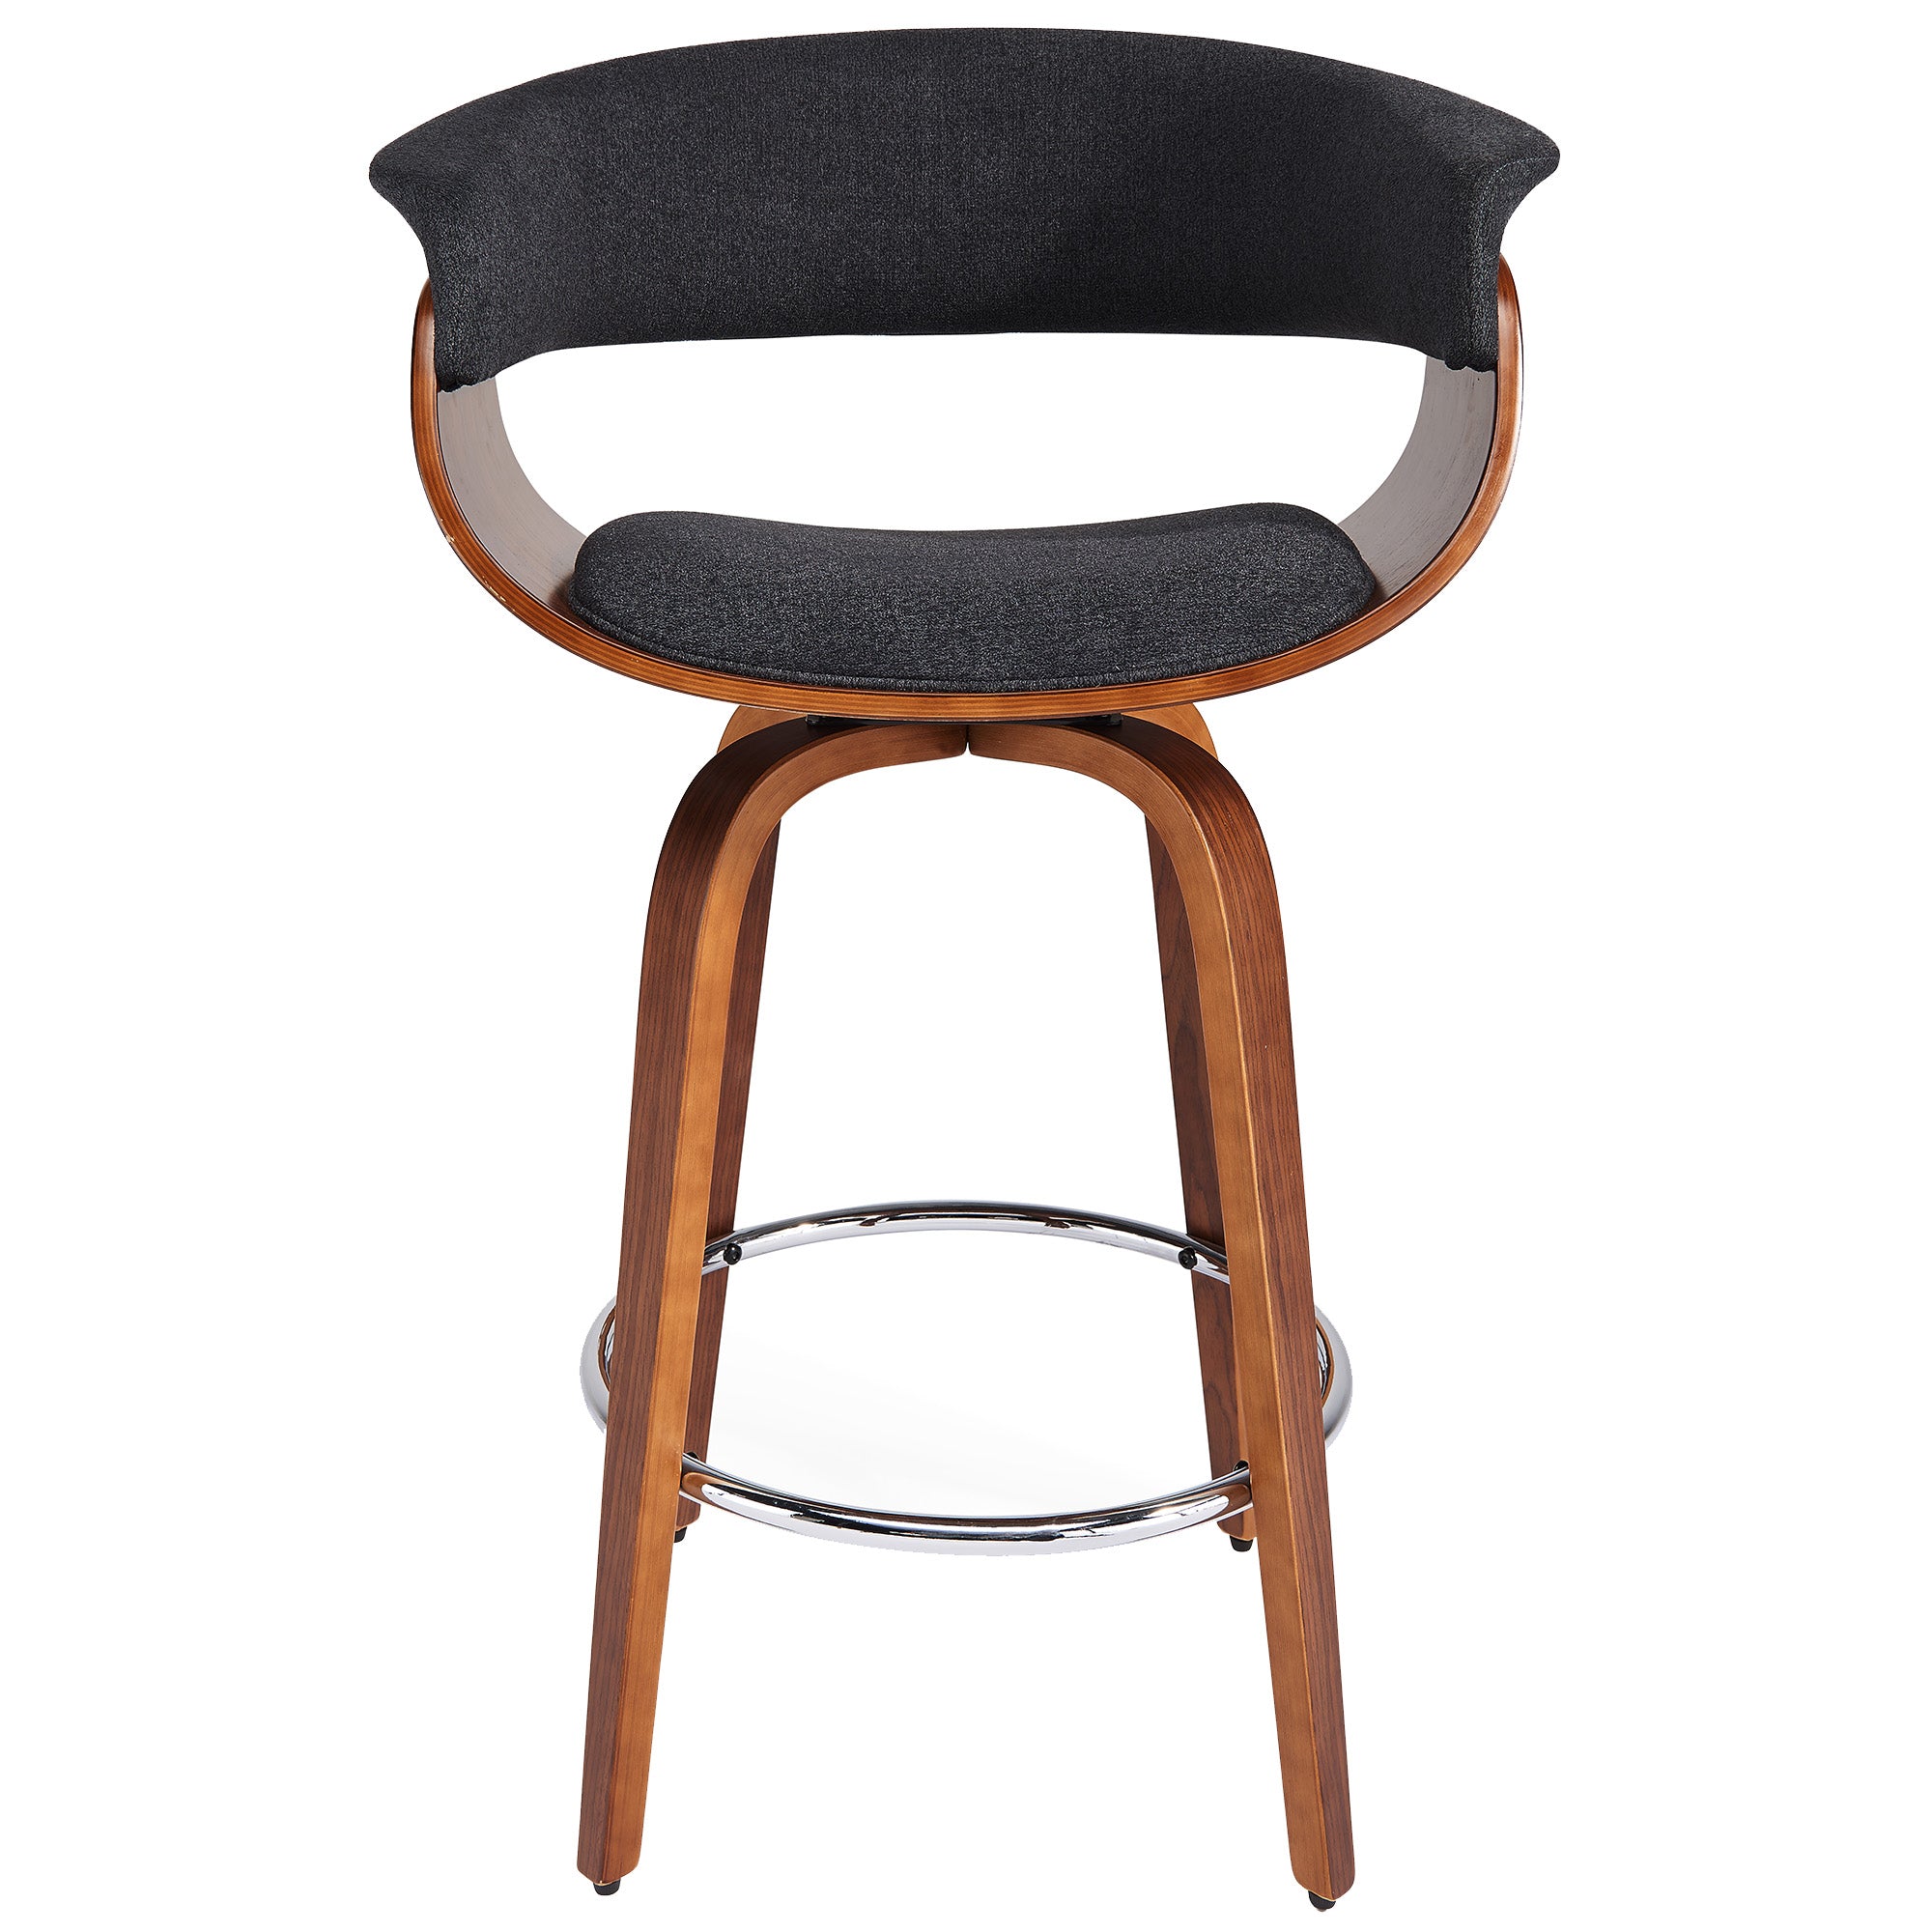 Holt-26" Counter Stool